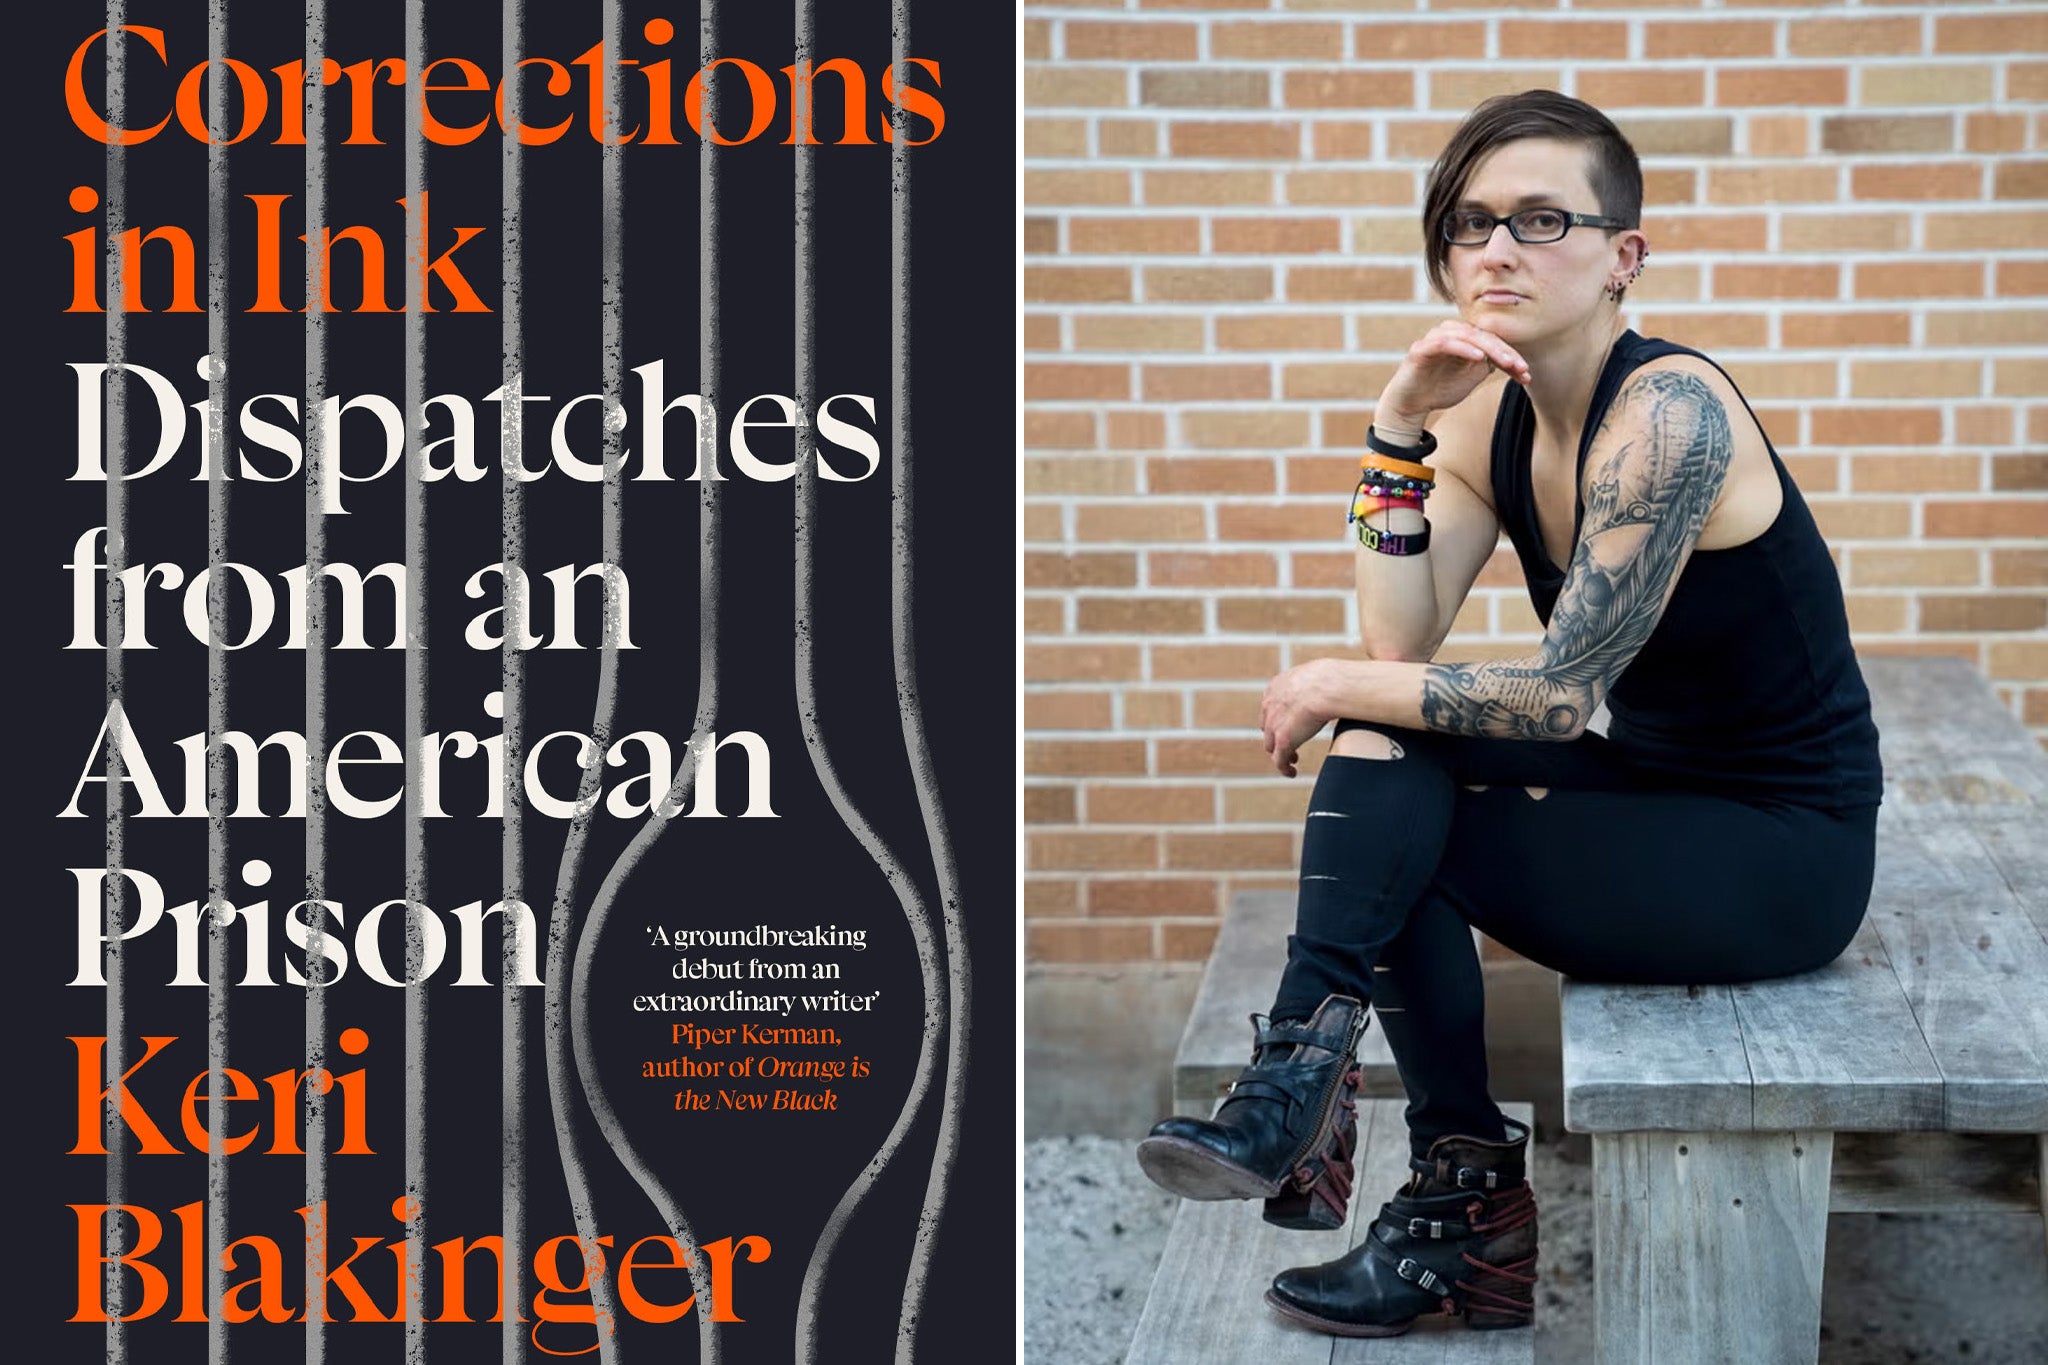 Keri Blakinger’s ‘Corrections in Ink’ is a bleak account of what life is like behind bars, where there are no rules